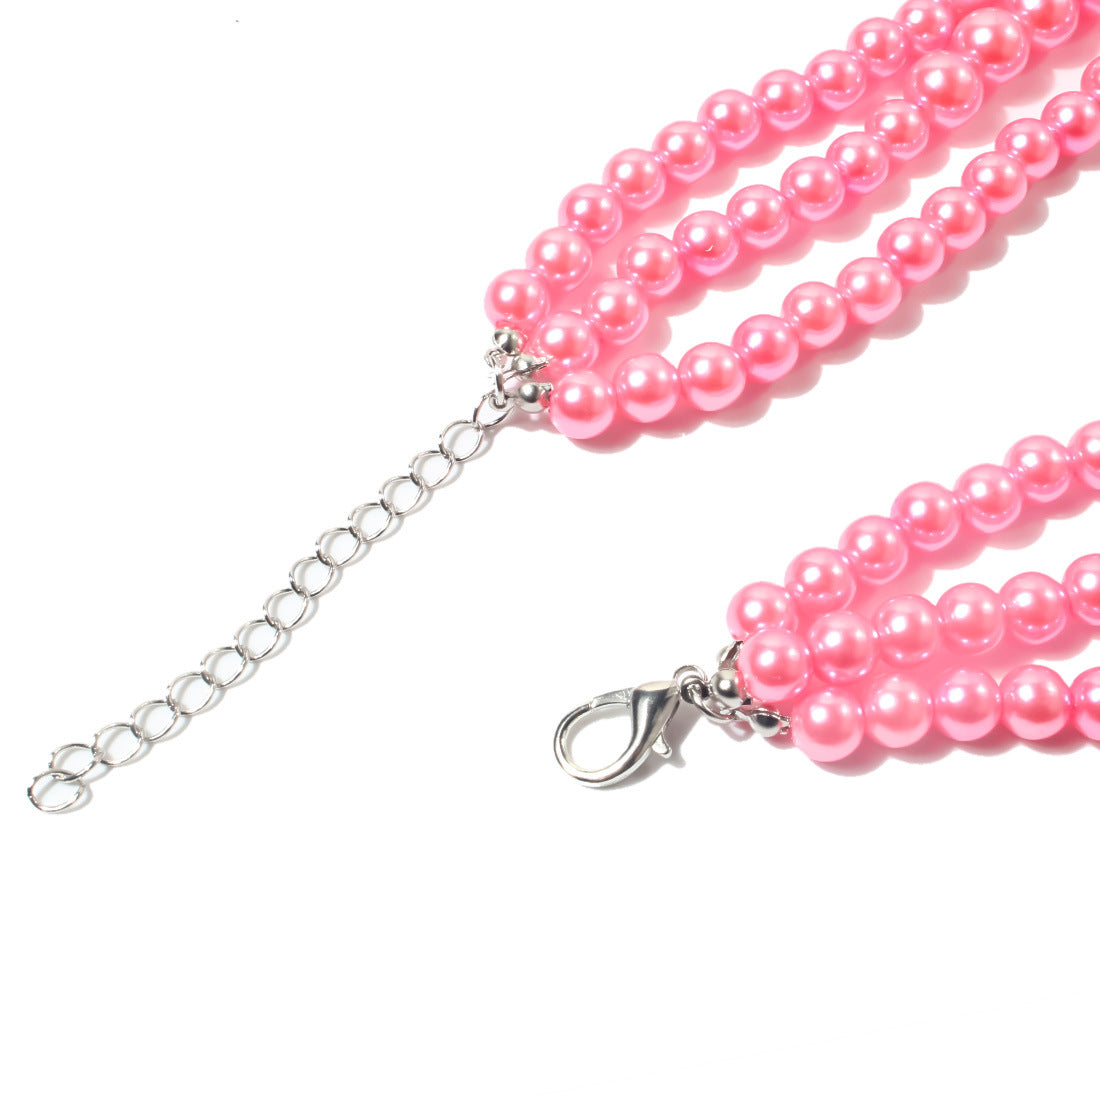 Women's Pearl Fashion Exaggerated String Clavicle Necklaces